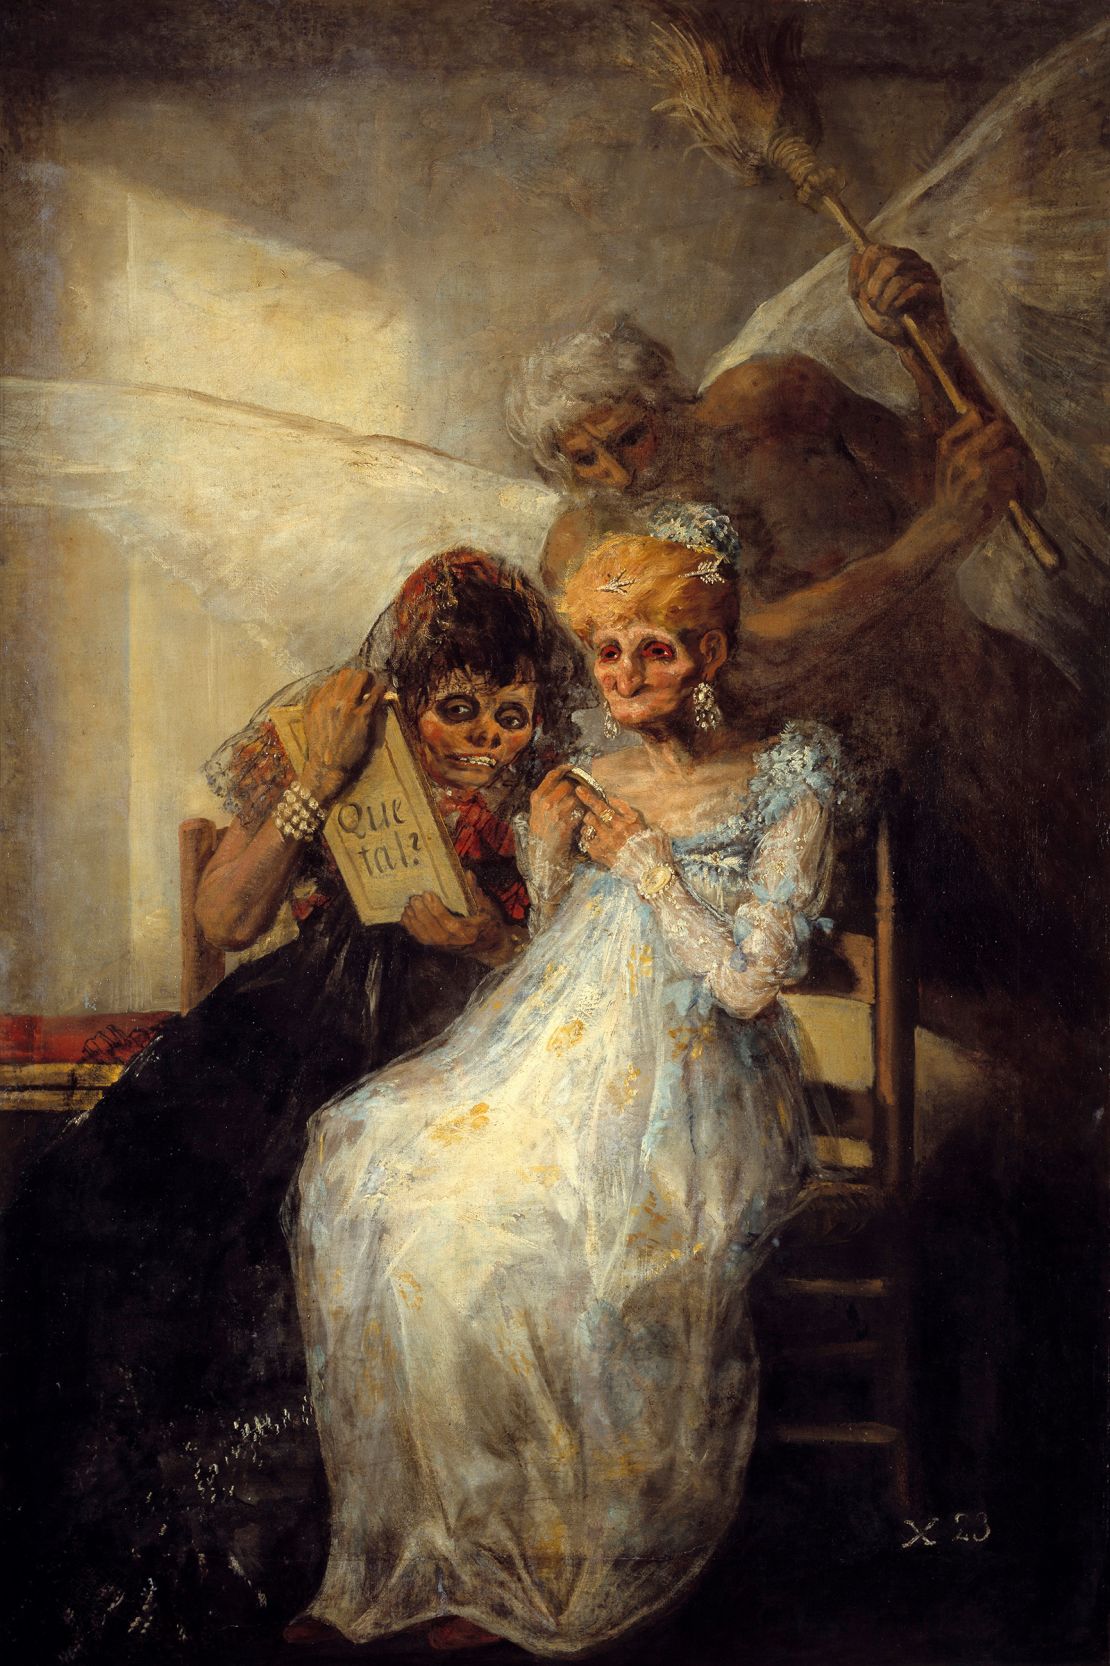 "Time and the Old Women," by Francisco de Goya.